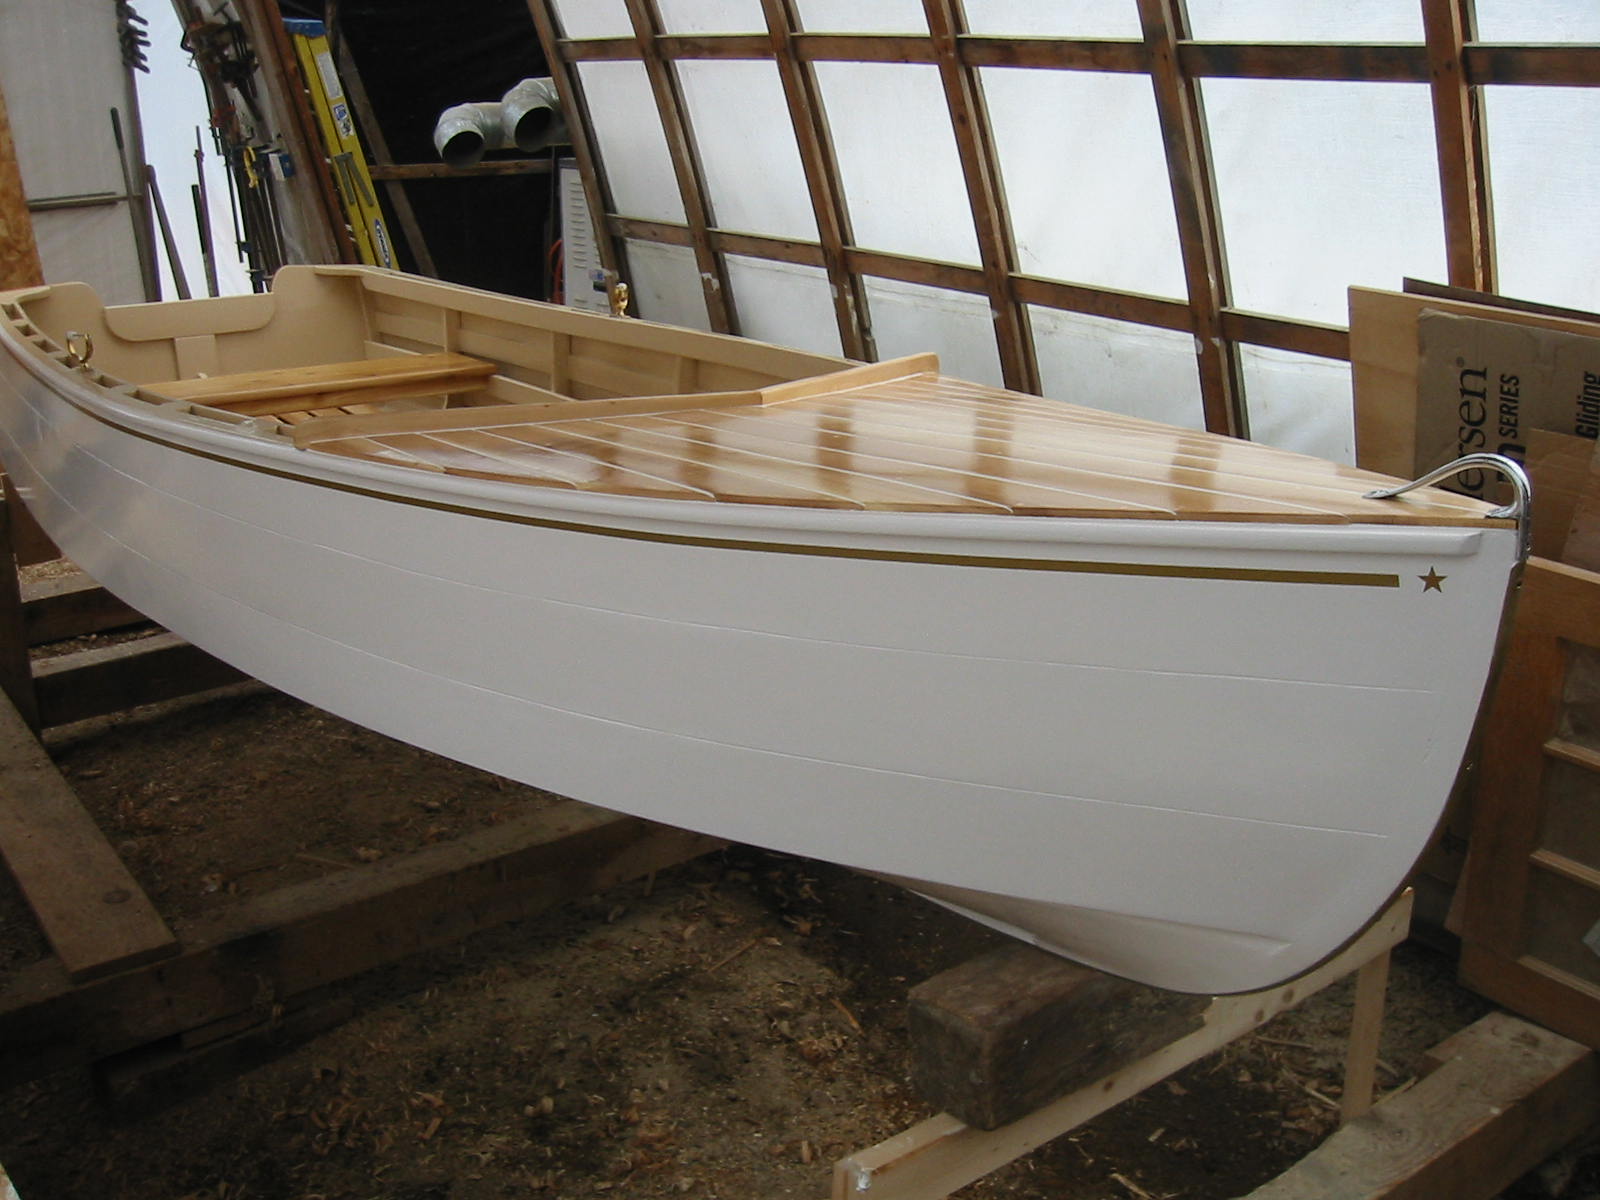 Wooden Boat Maine [How To &amp; DIY Building Plans] - Boat